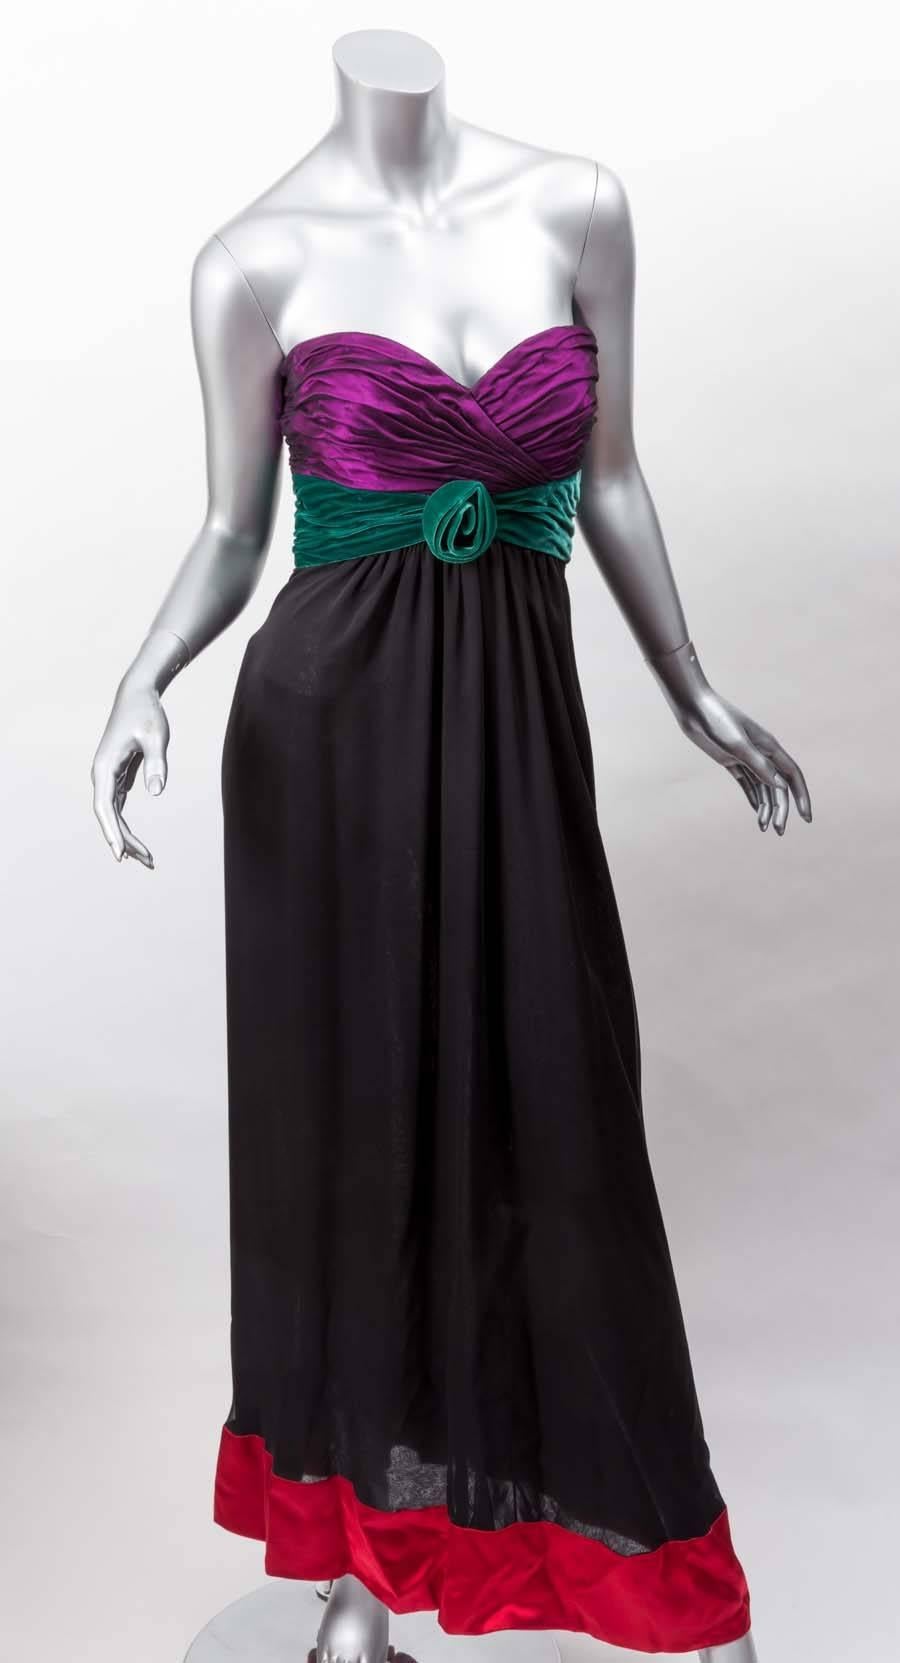 Vintage Oscar de la Renta Strapless Evening Gown features purple  bodice with black netting overlay,green velvet waist with rose center, long black silk skirt trimmed in red satin .